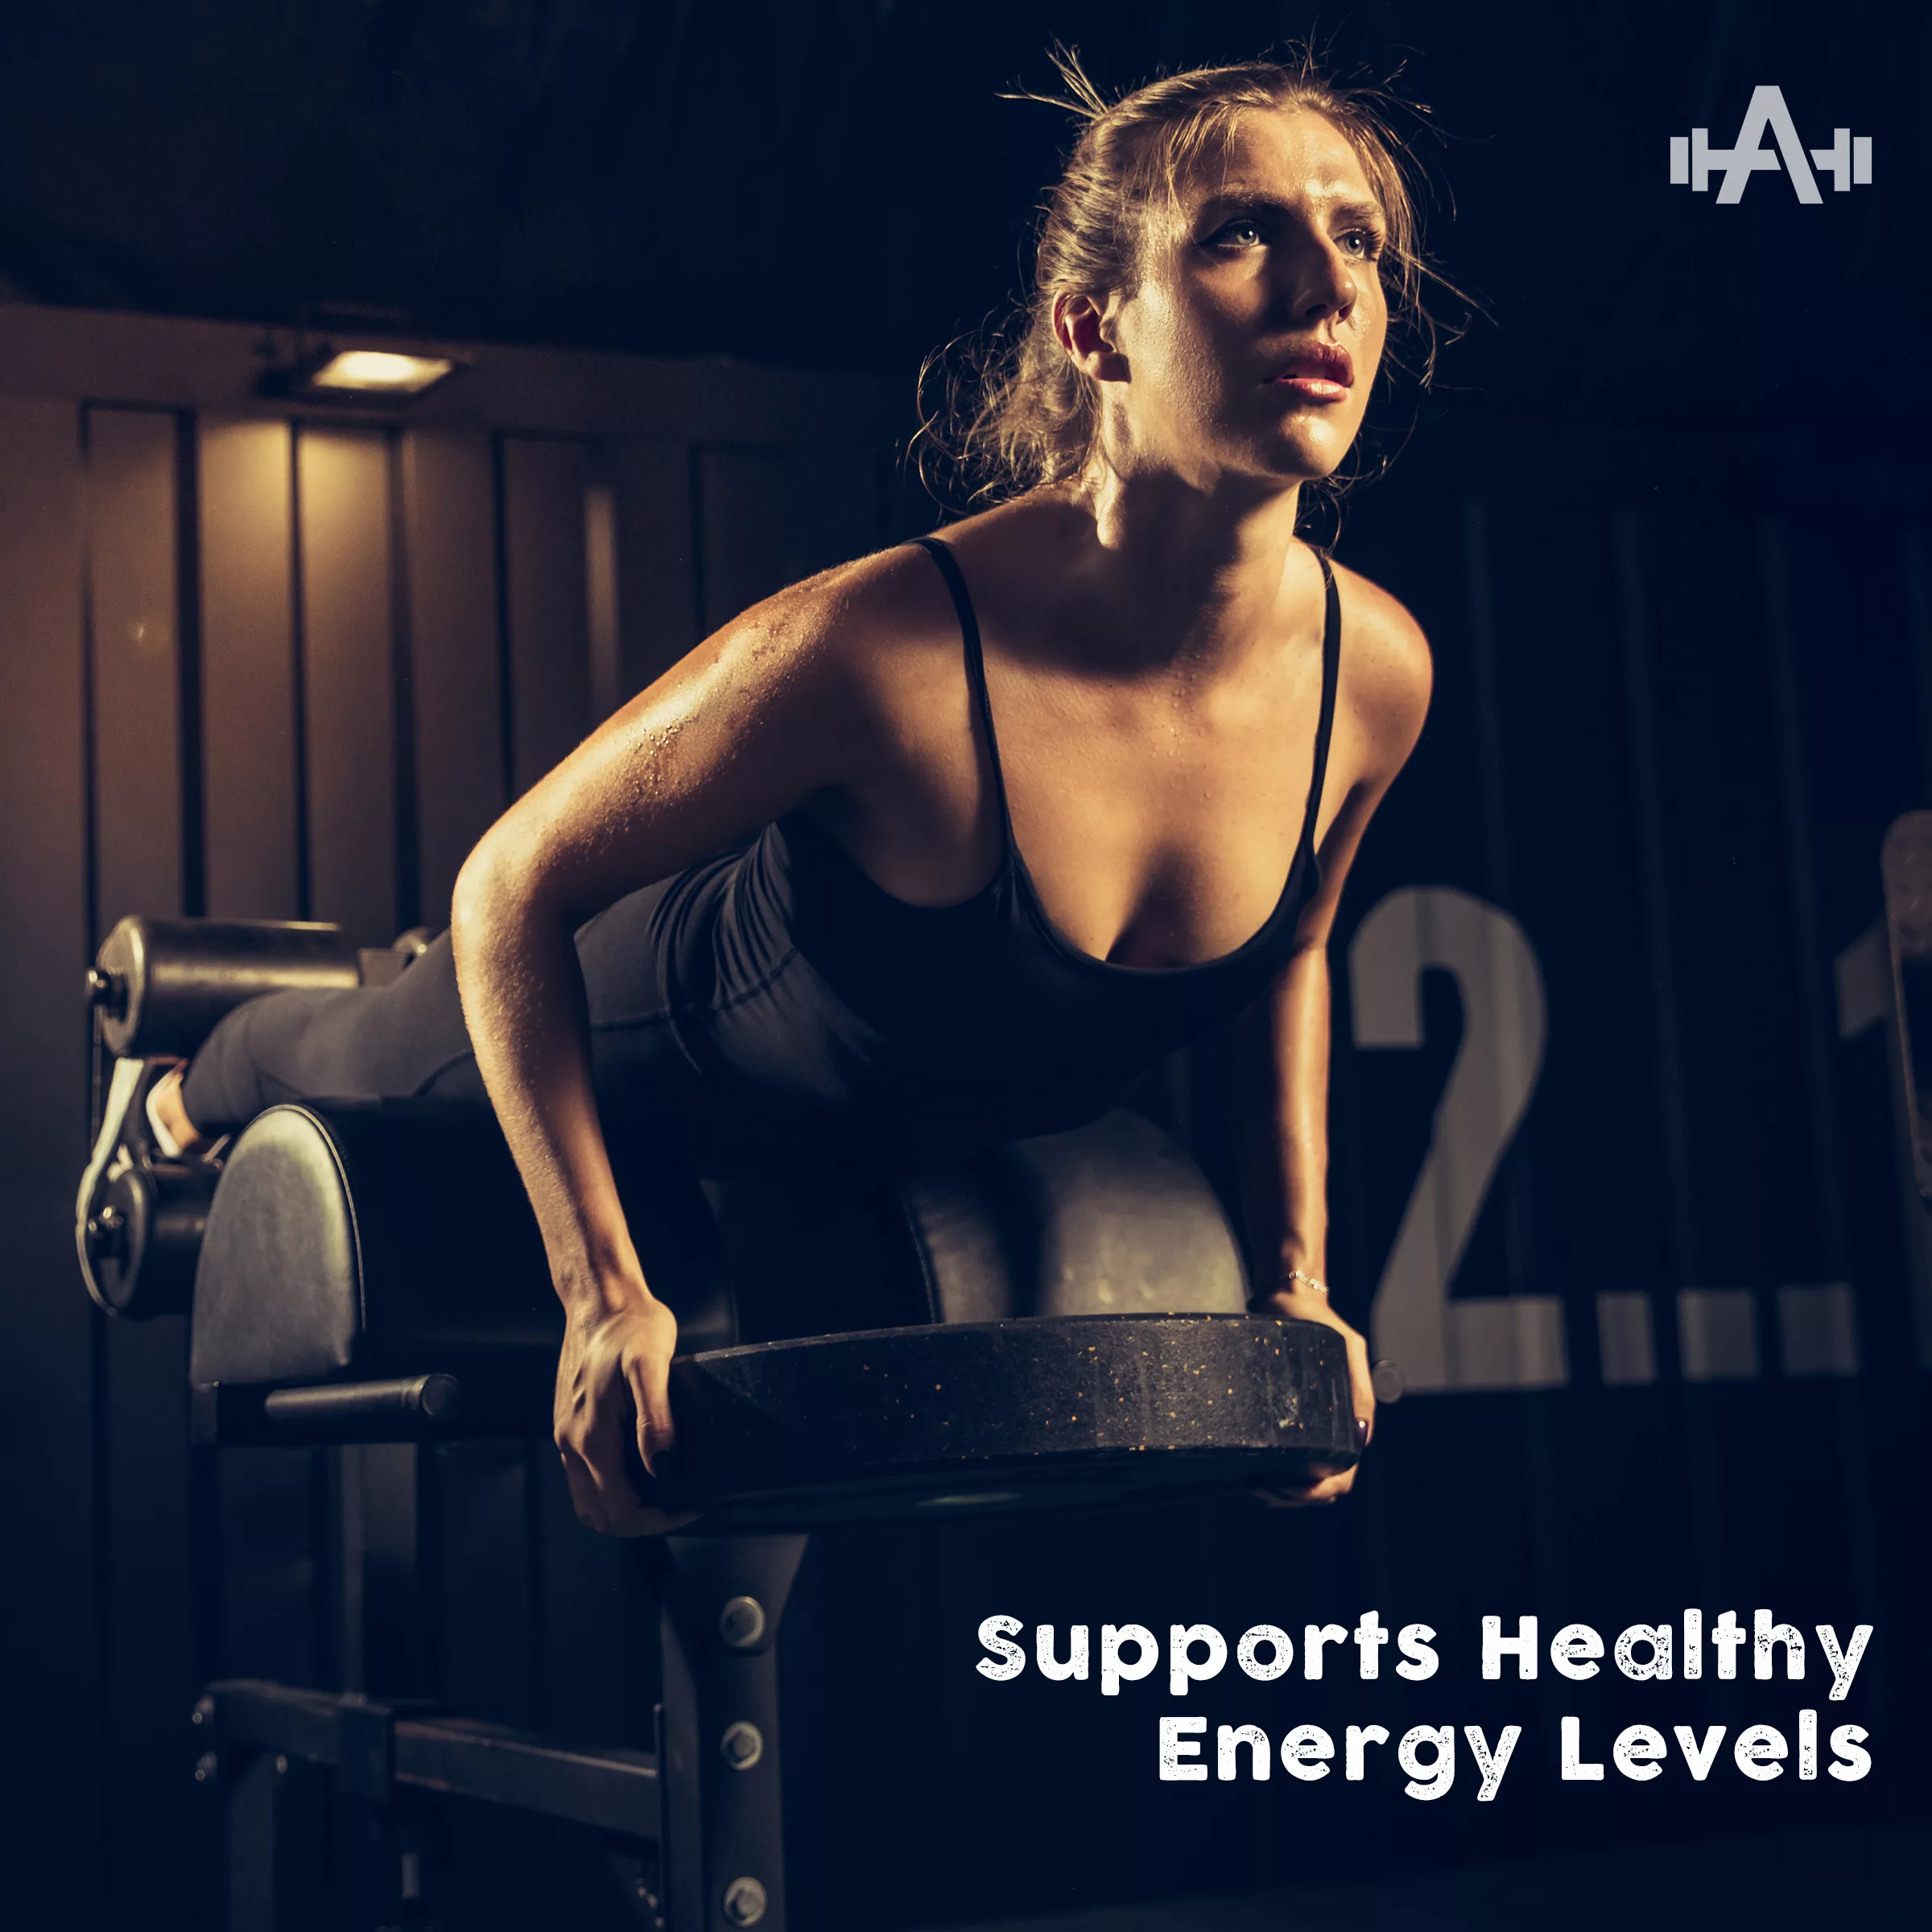 Supports Healthy Energy Levels